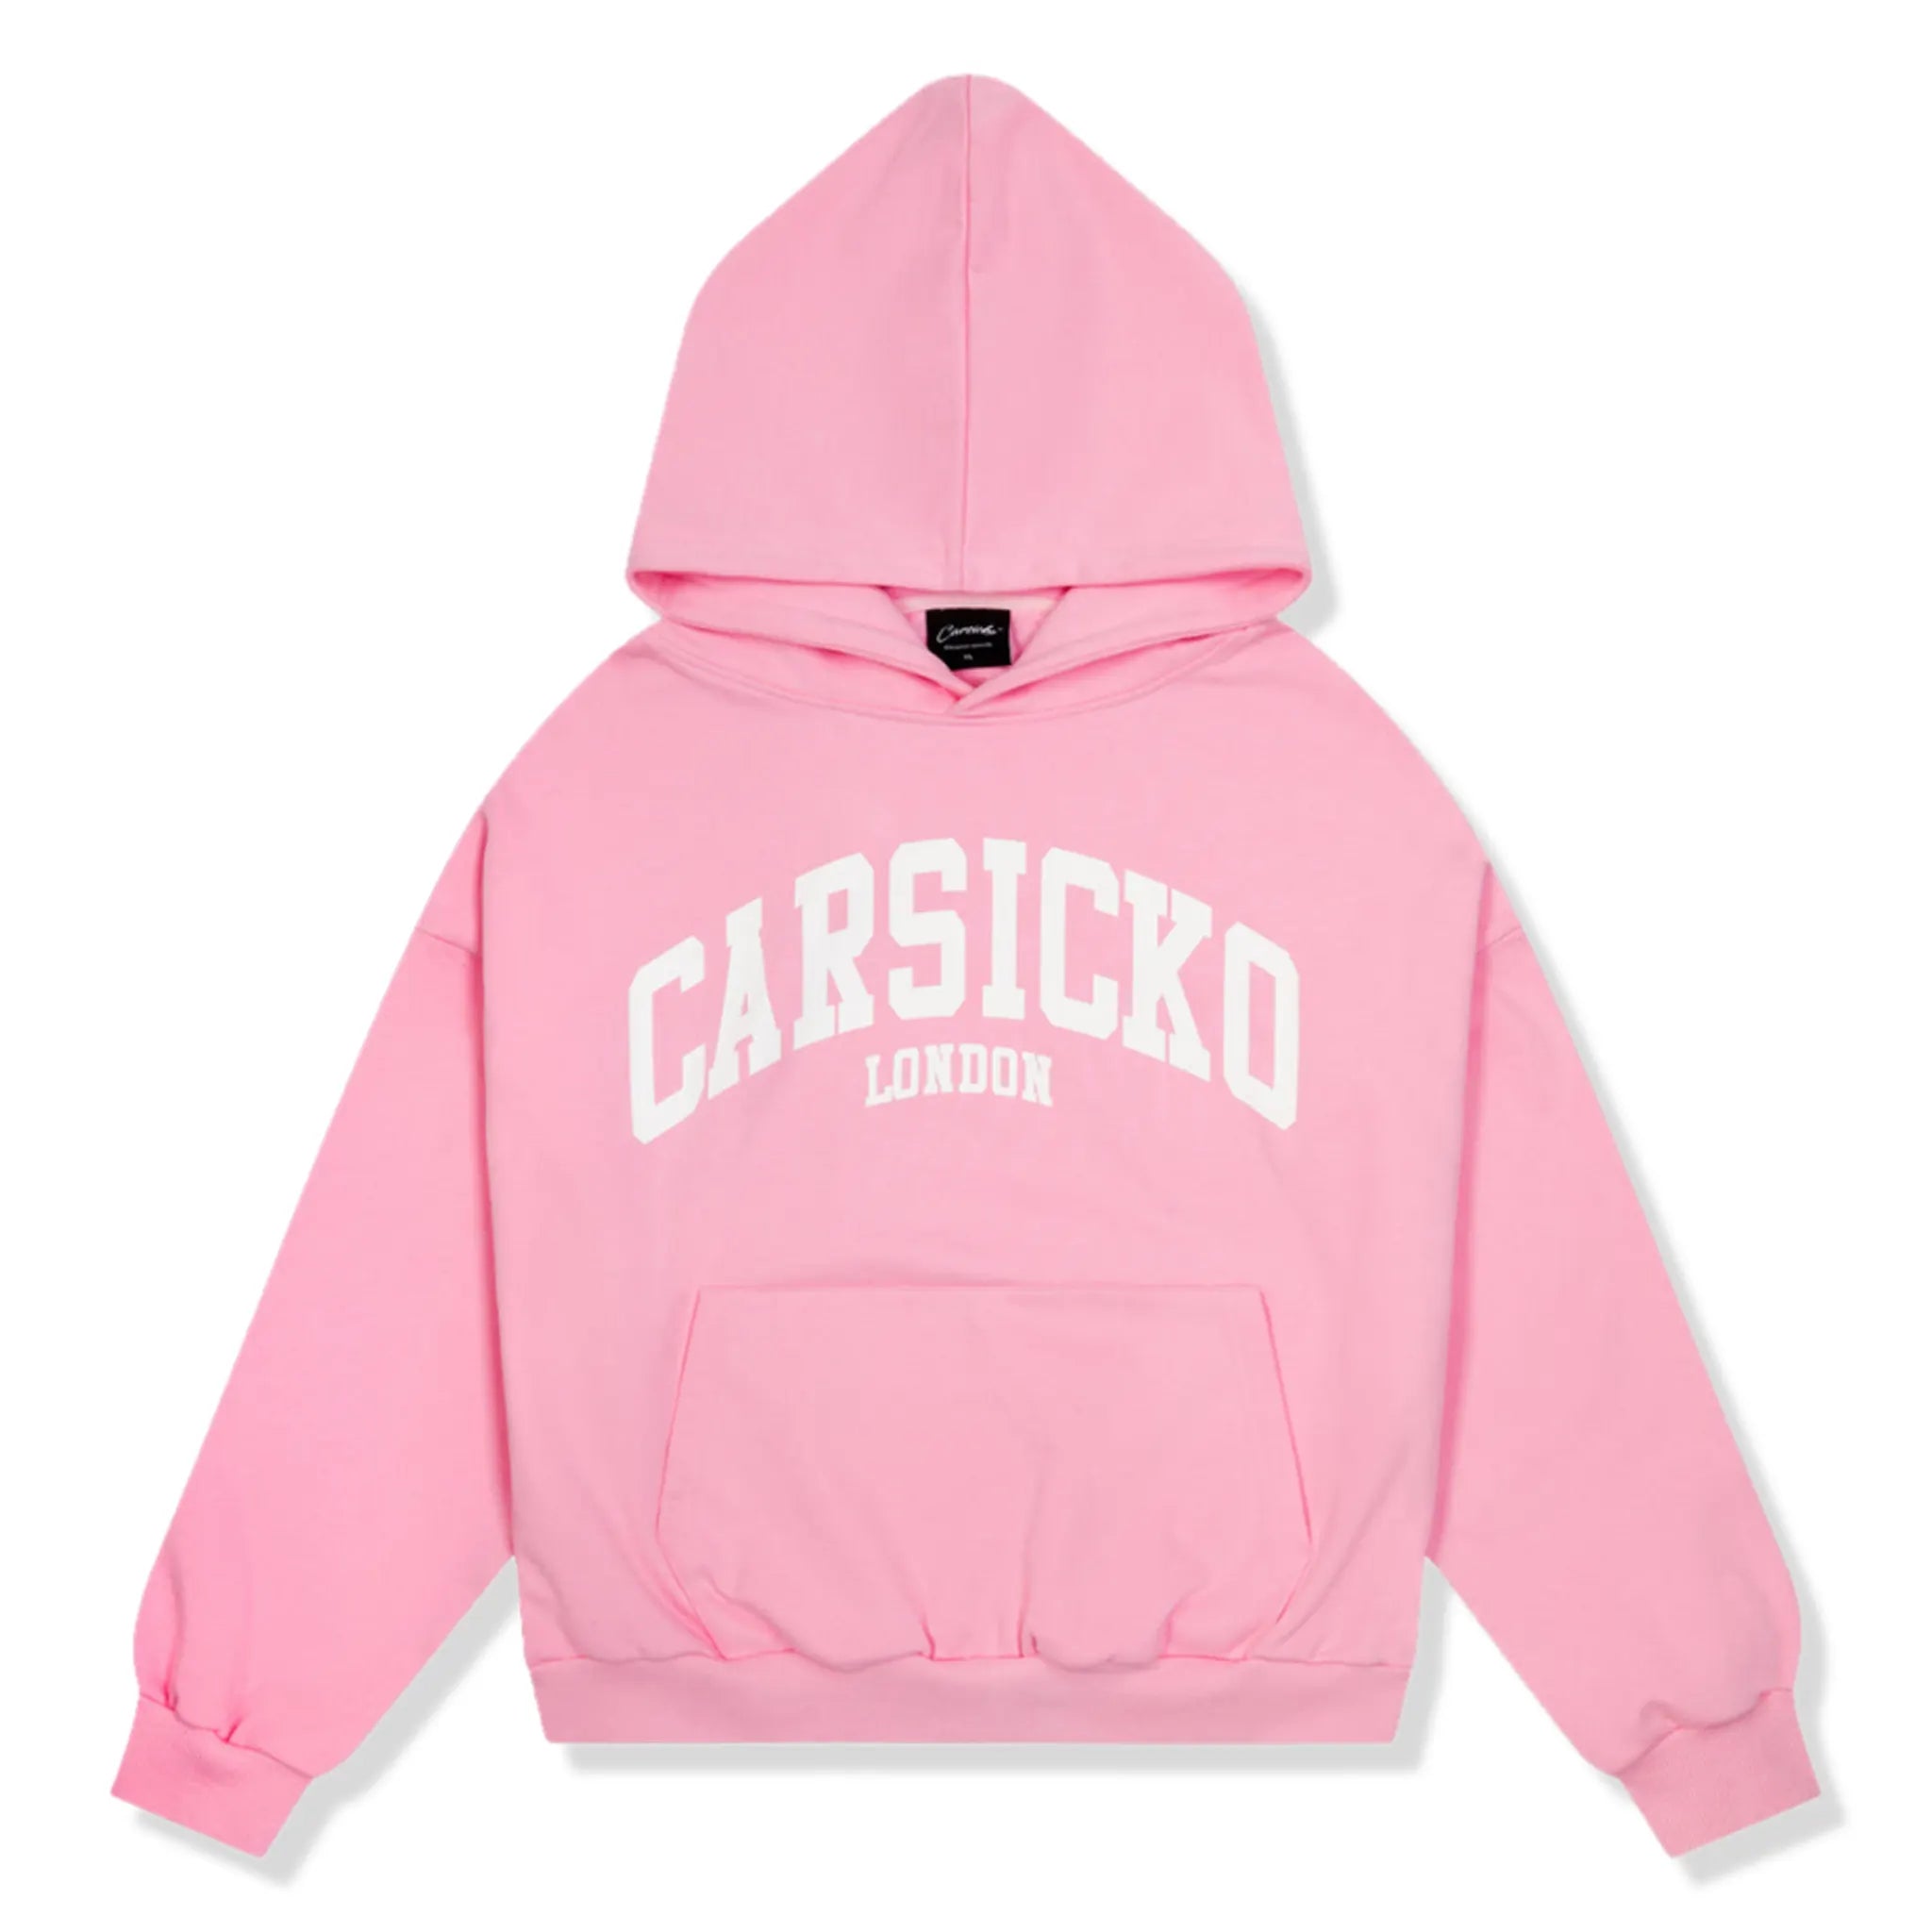 Front view of Carsicko London Pink Hoodie